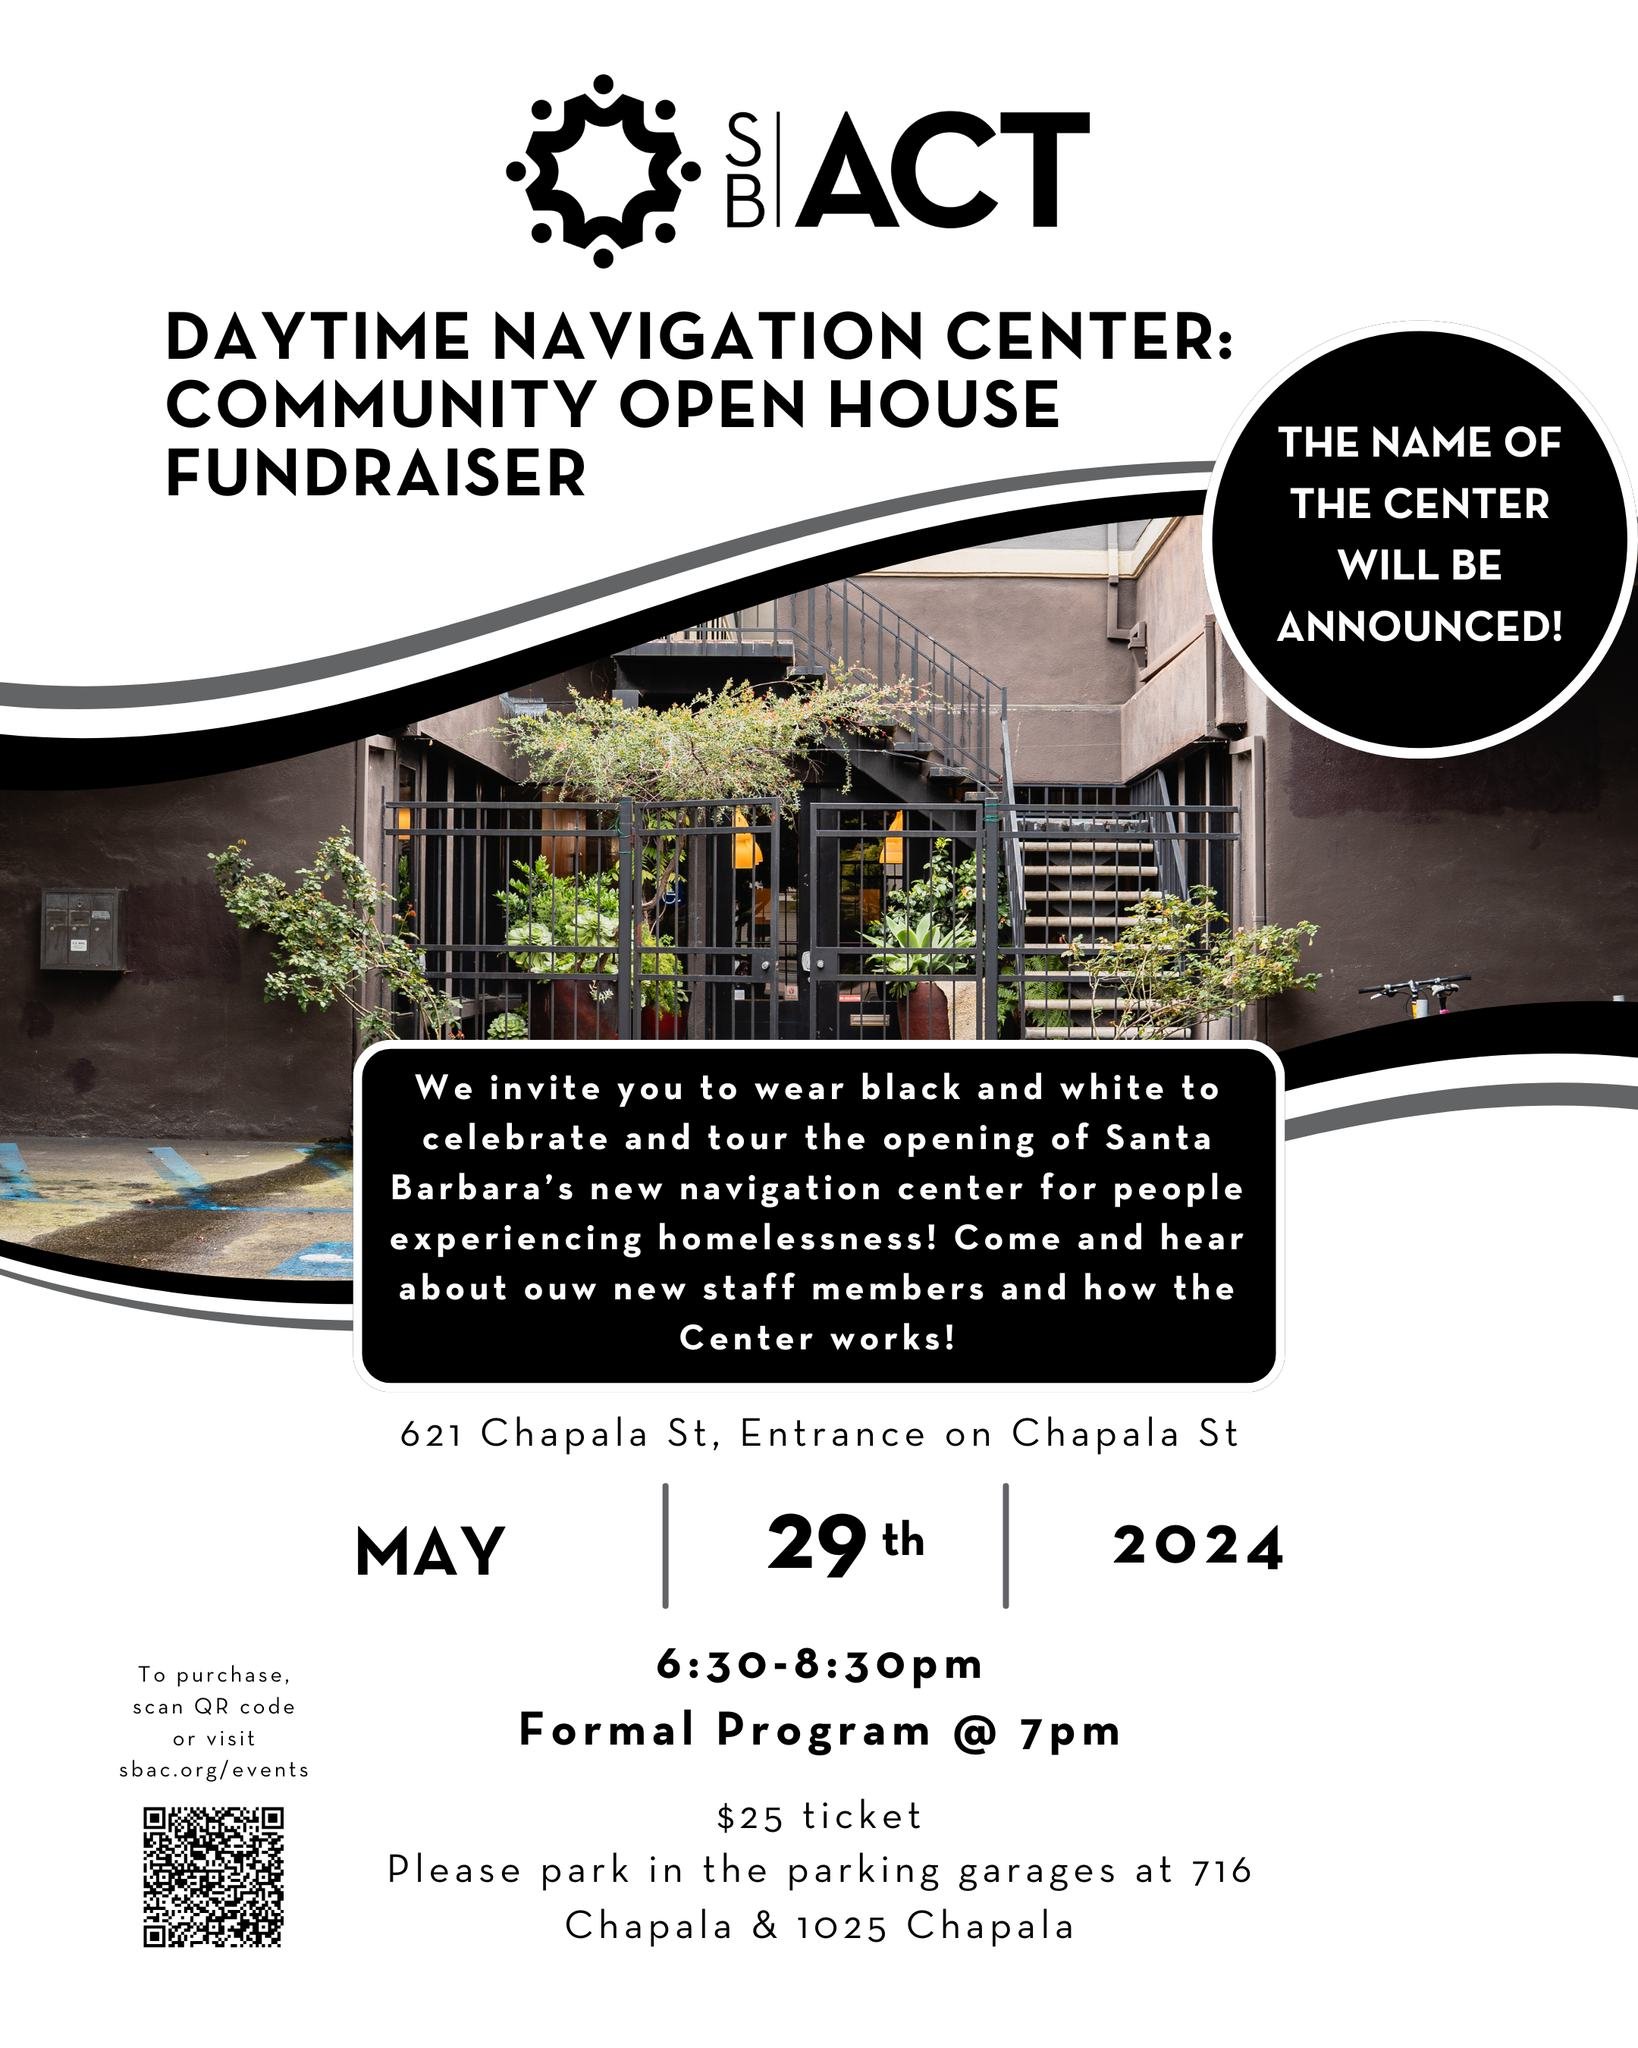 Santa Barbara's newest Daytime Navigation Center for people experiencing homelessness is opening soon! We invite you to come and celebrate, tour, and support the center's opening. There will be a formal program at 7pm that talks about the Center's hi